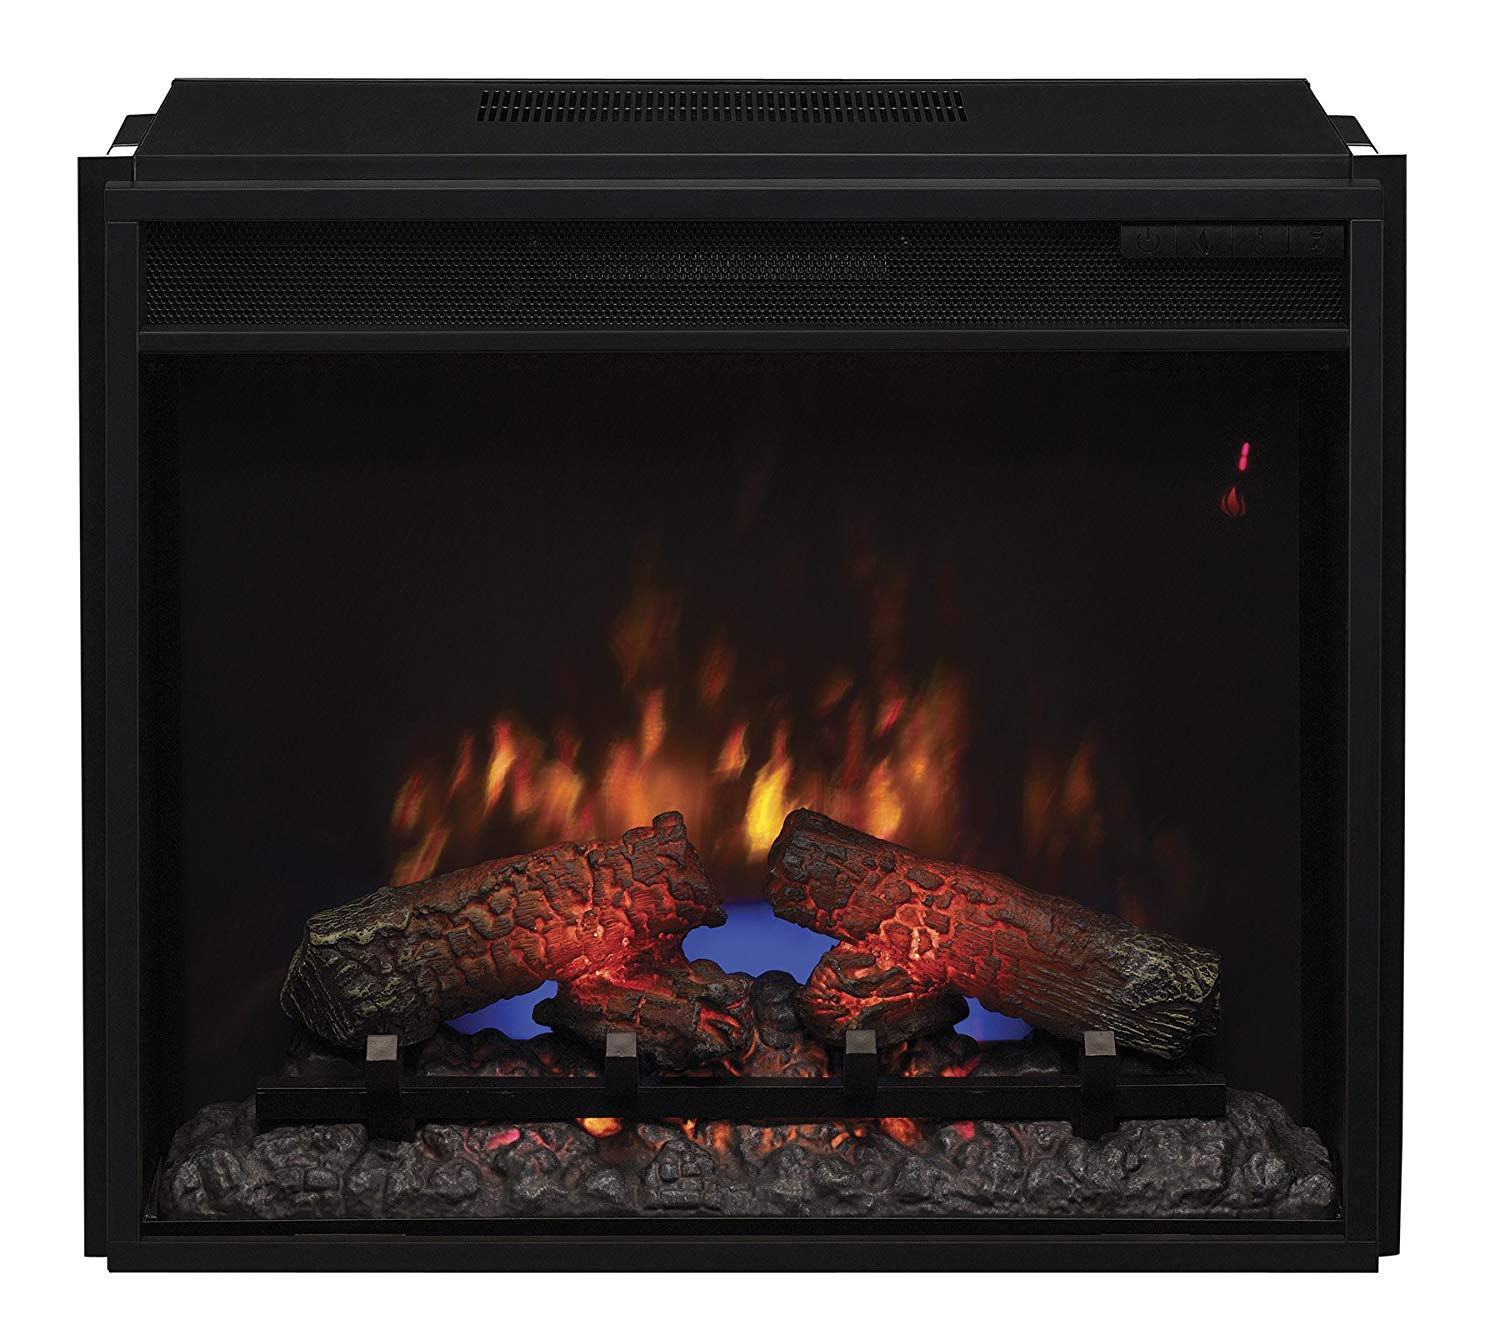 Duraflame Fireplace Heater Unique Classicflame 23ef031grp 23" Electric Fireplace Insert with Safer Plug